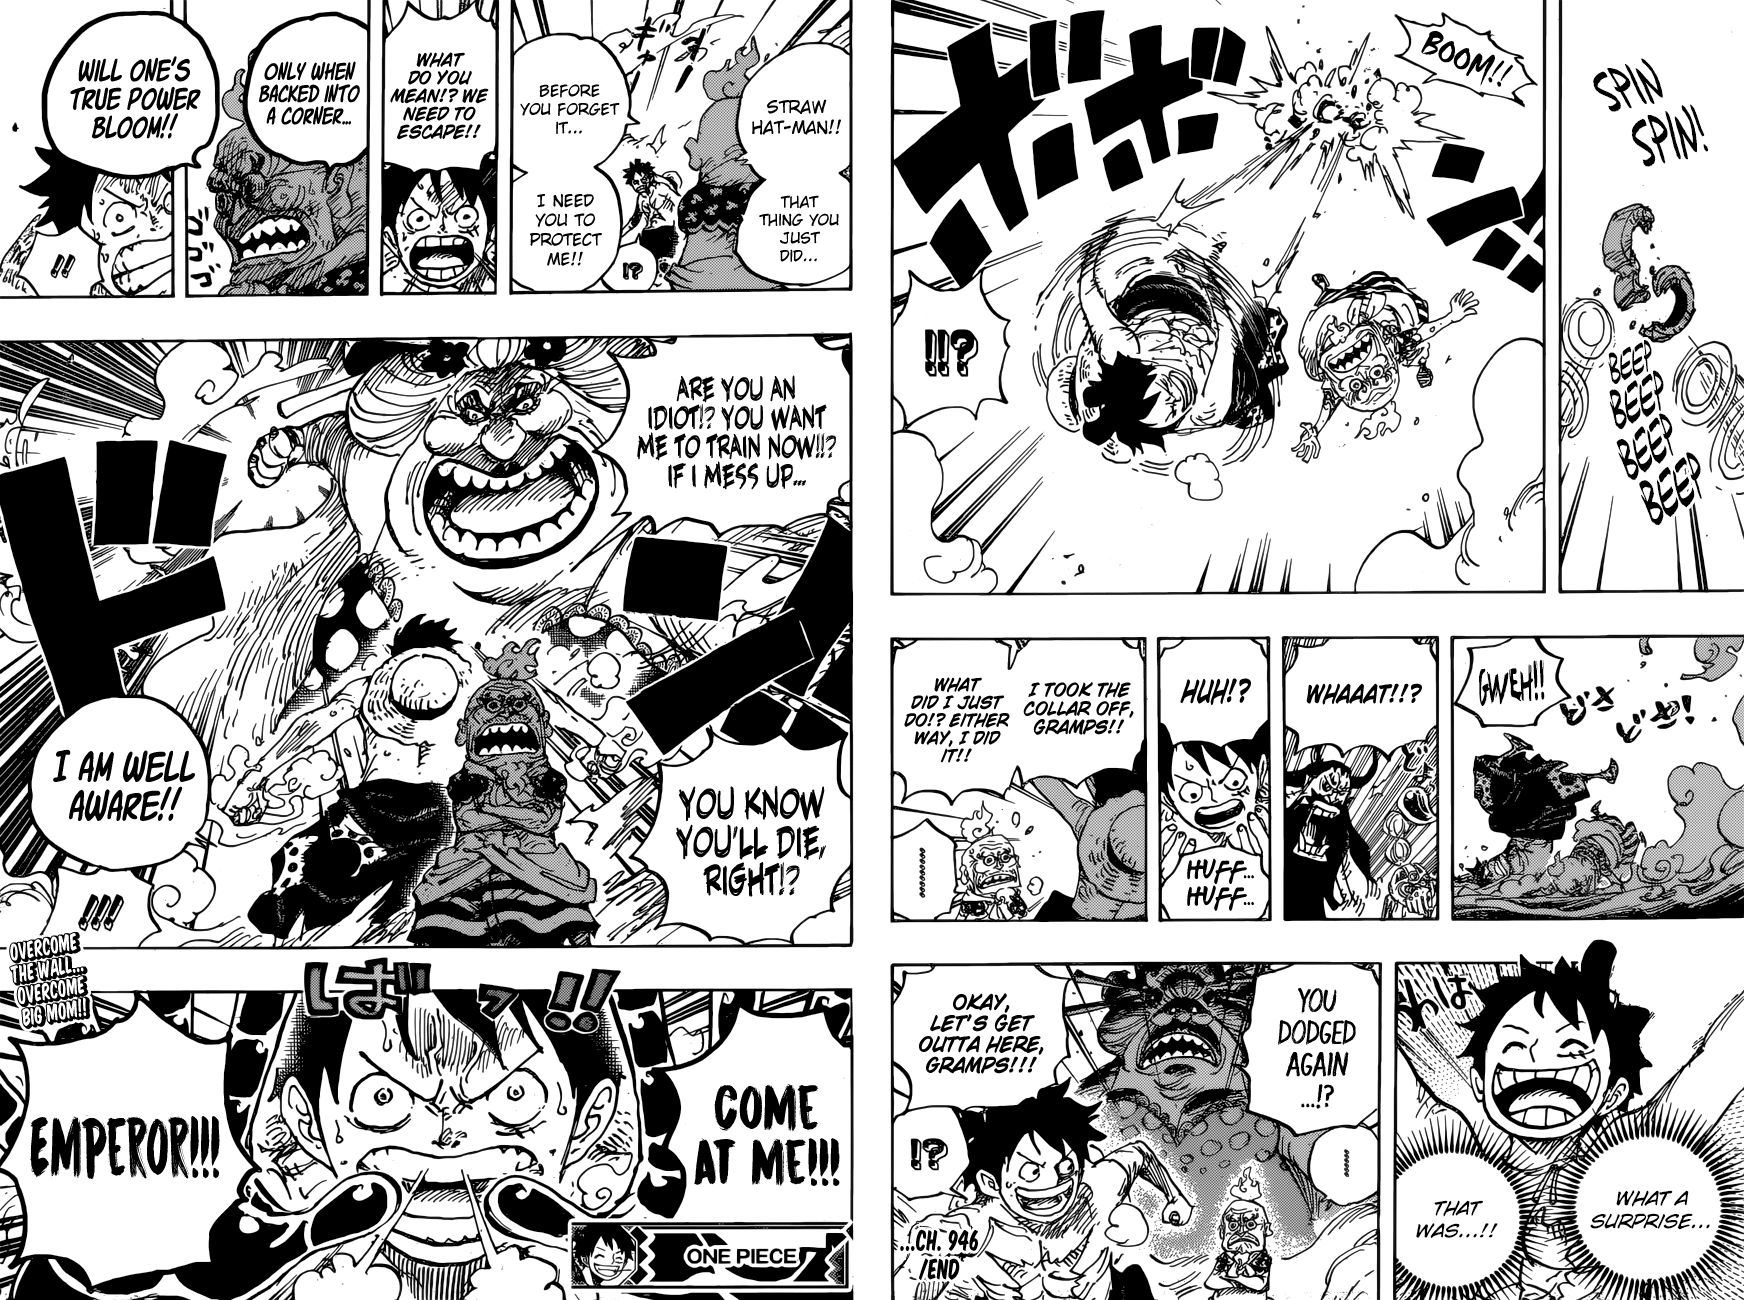 One Piece, Chapter 946 - Queen VS. O-Lin image 15